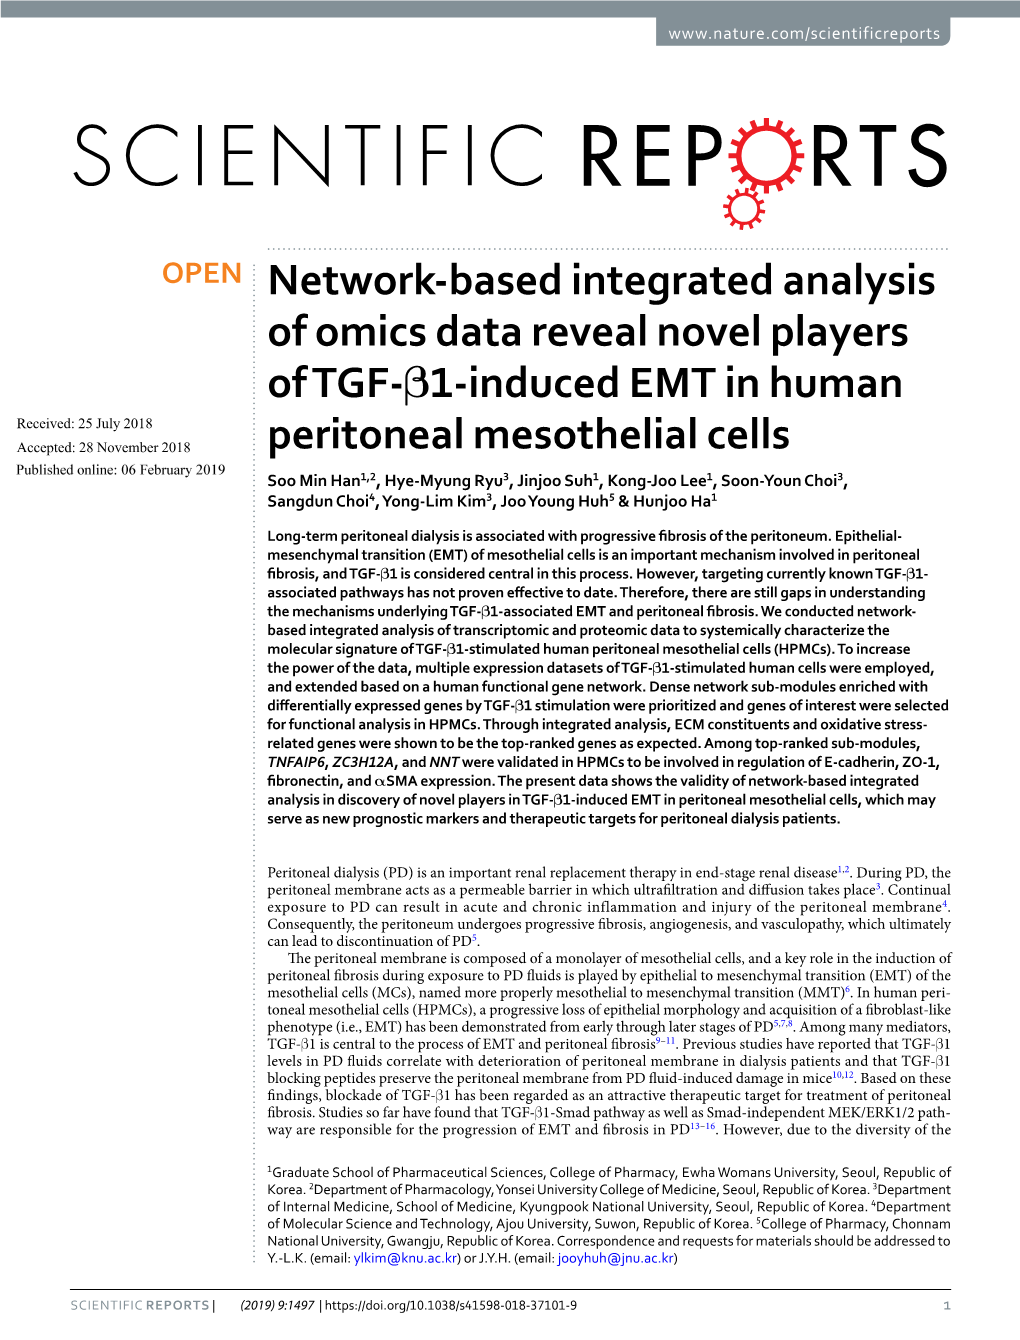 Network-Based Integrated Analysis of Omics Data Reveal Novel Players Of